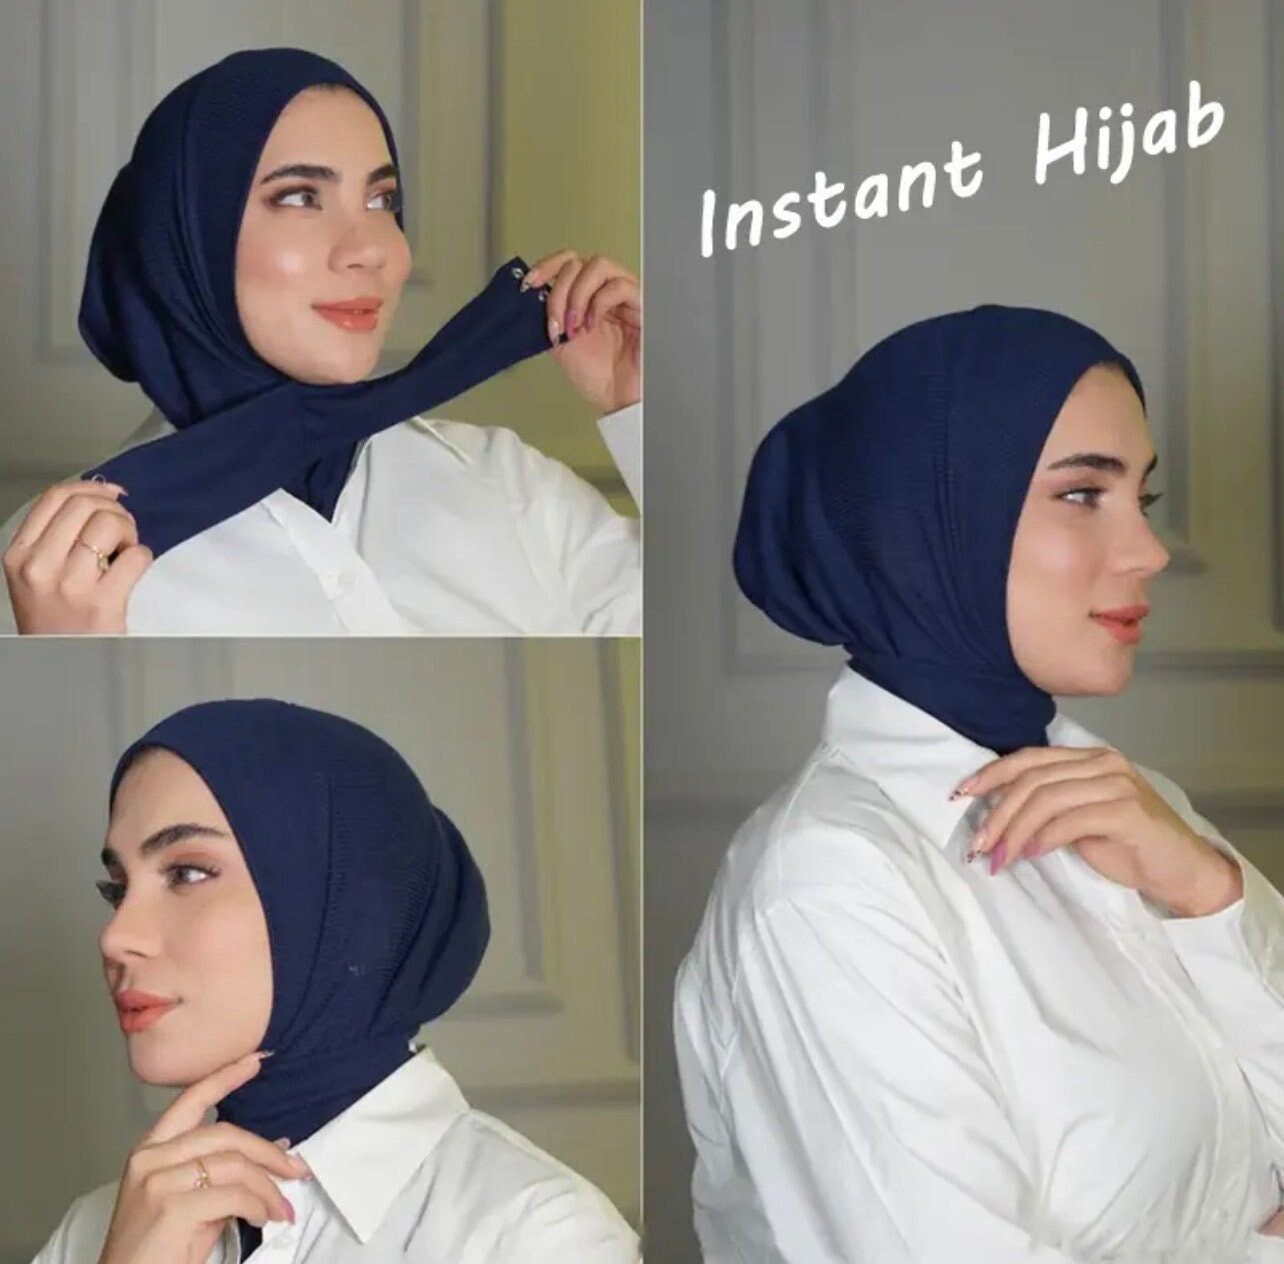 The Instant Navy Jersey Hijab Scarf by Suriah Scarves